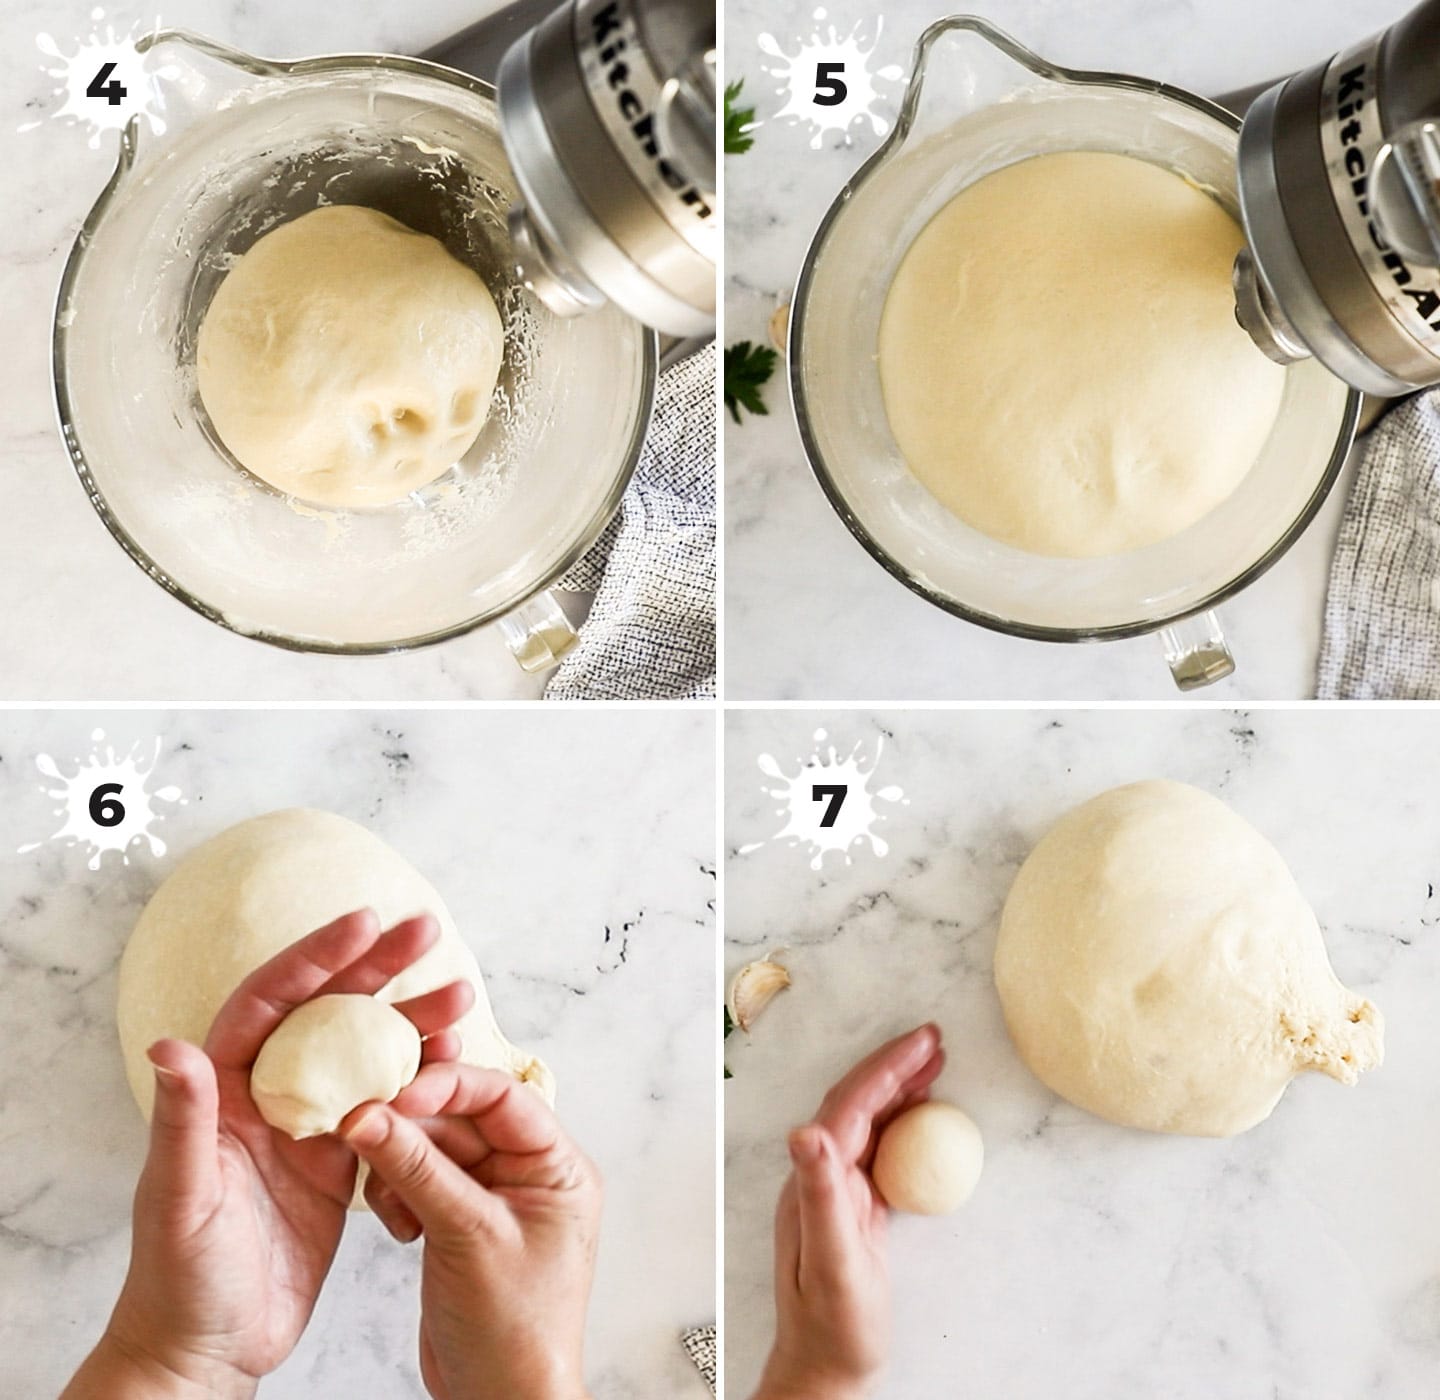 Showing how to rise and shape the dough.